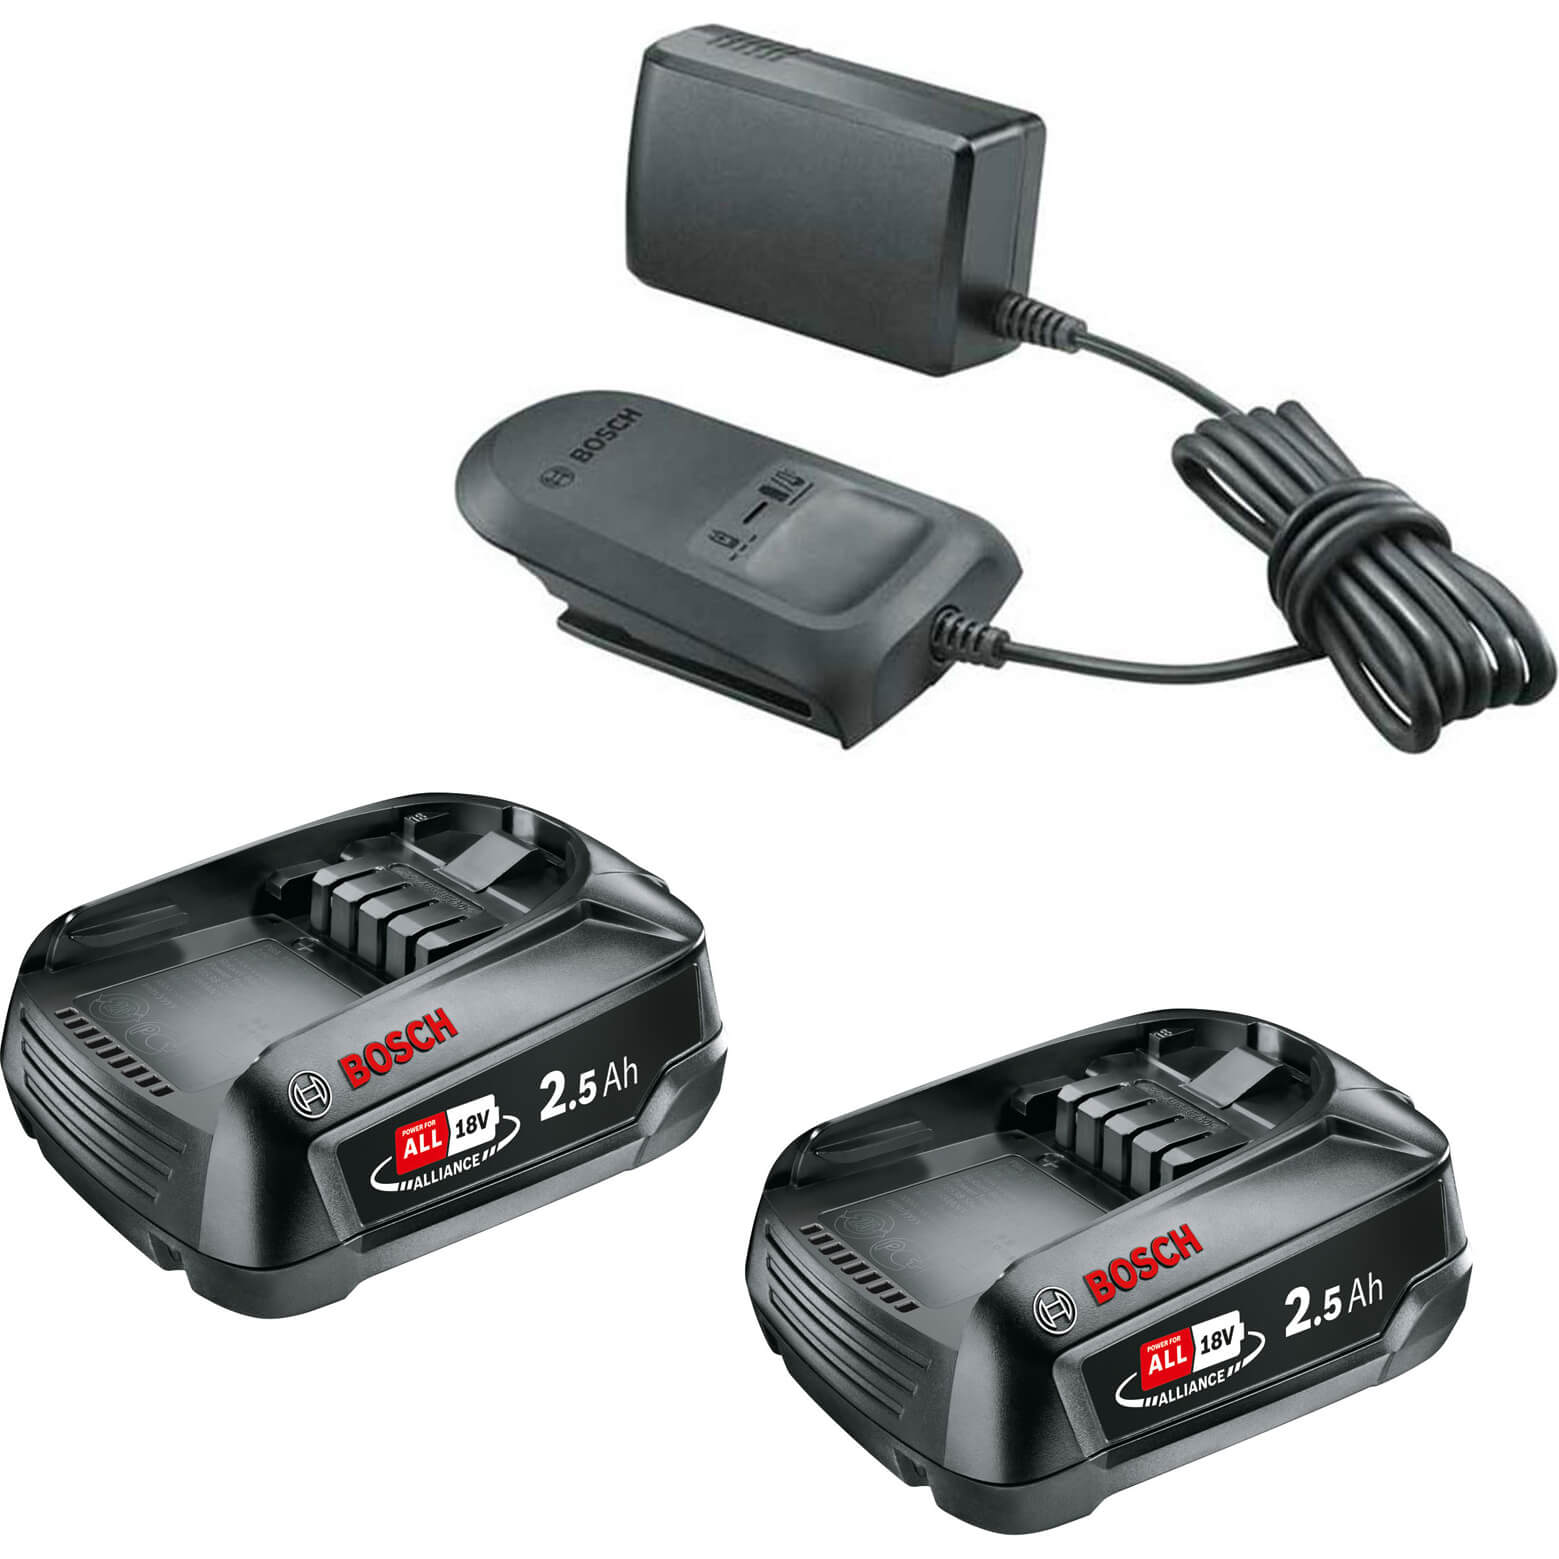 Photo of Bosch Genuine Power4all 18v Cordless Li-ion Twin Battery 2.5ah And Charger Set 2.5ah